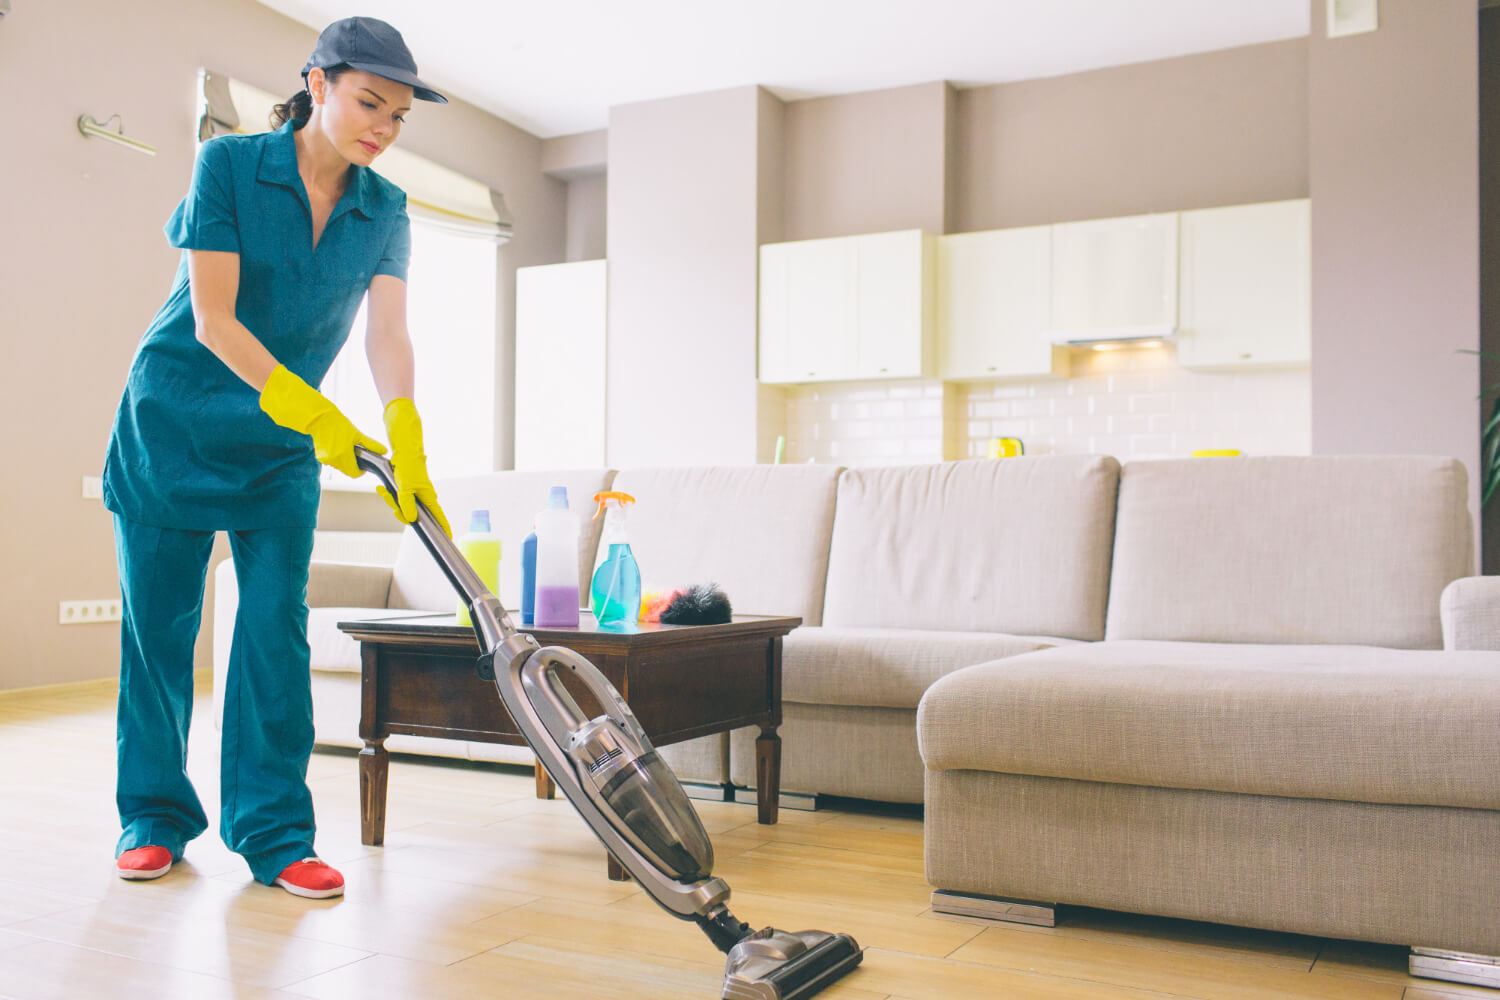 young cleaner in uniform and hat vacuums floor in apartment with big corner sofa